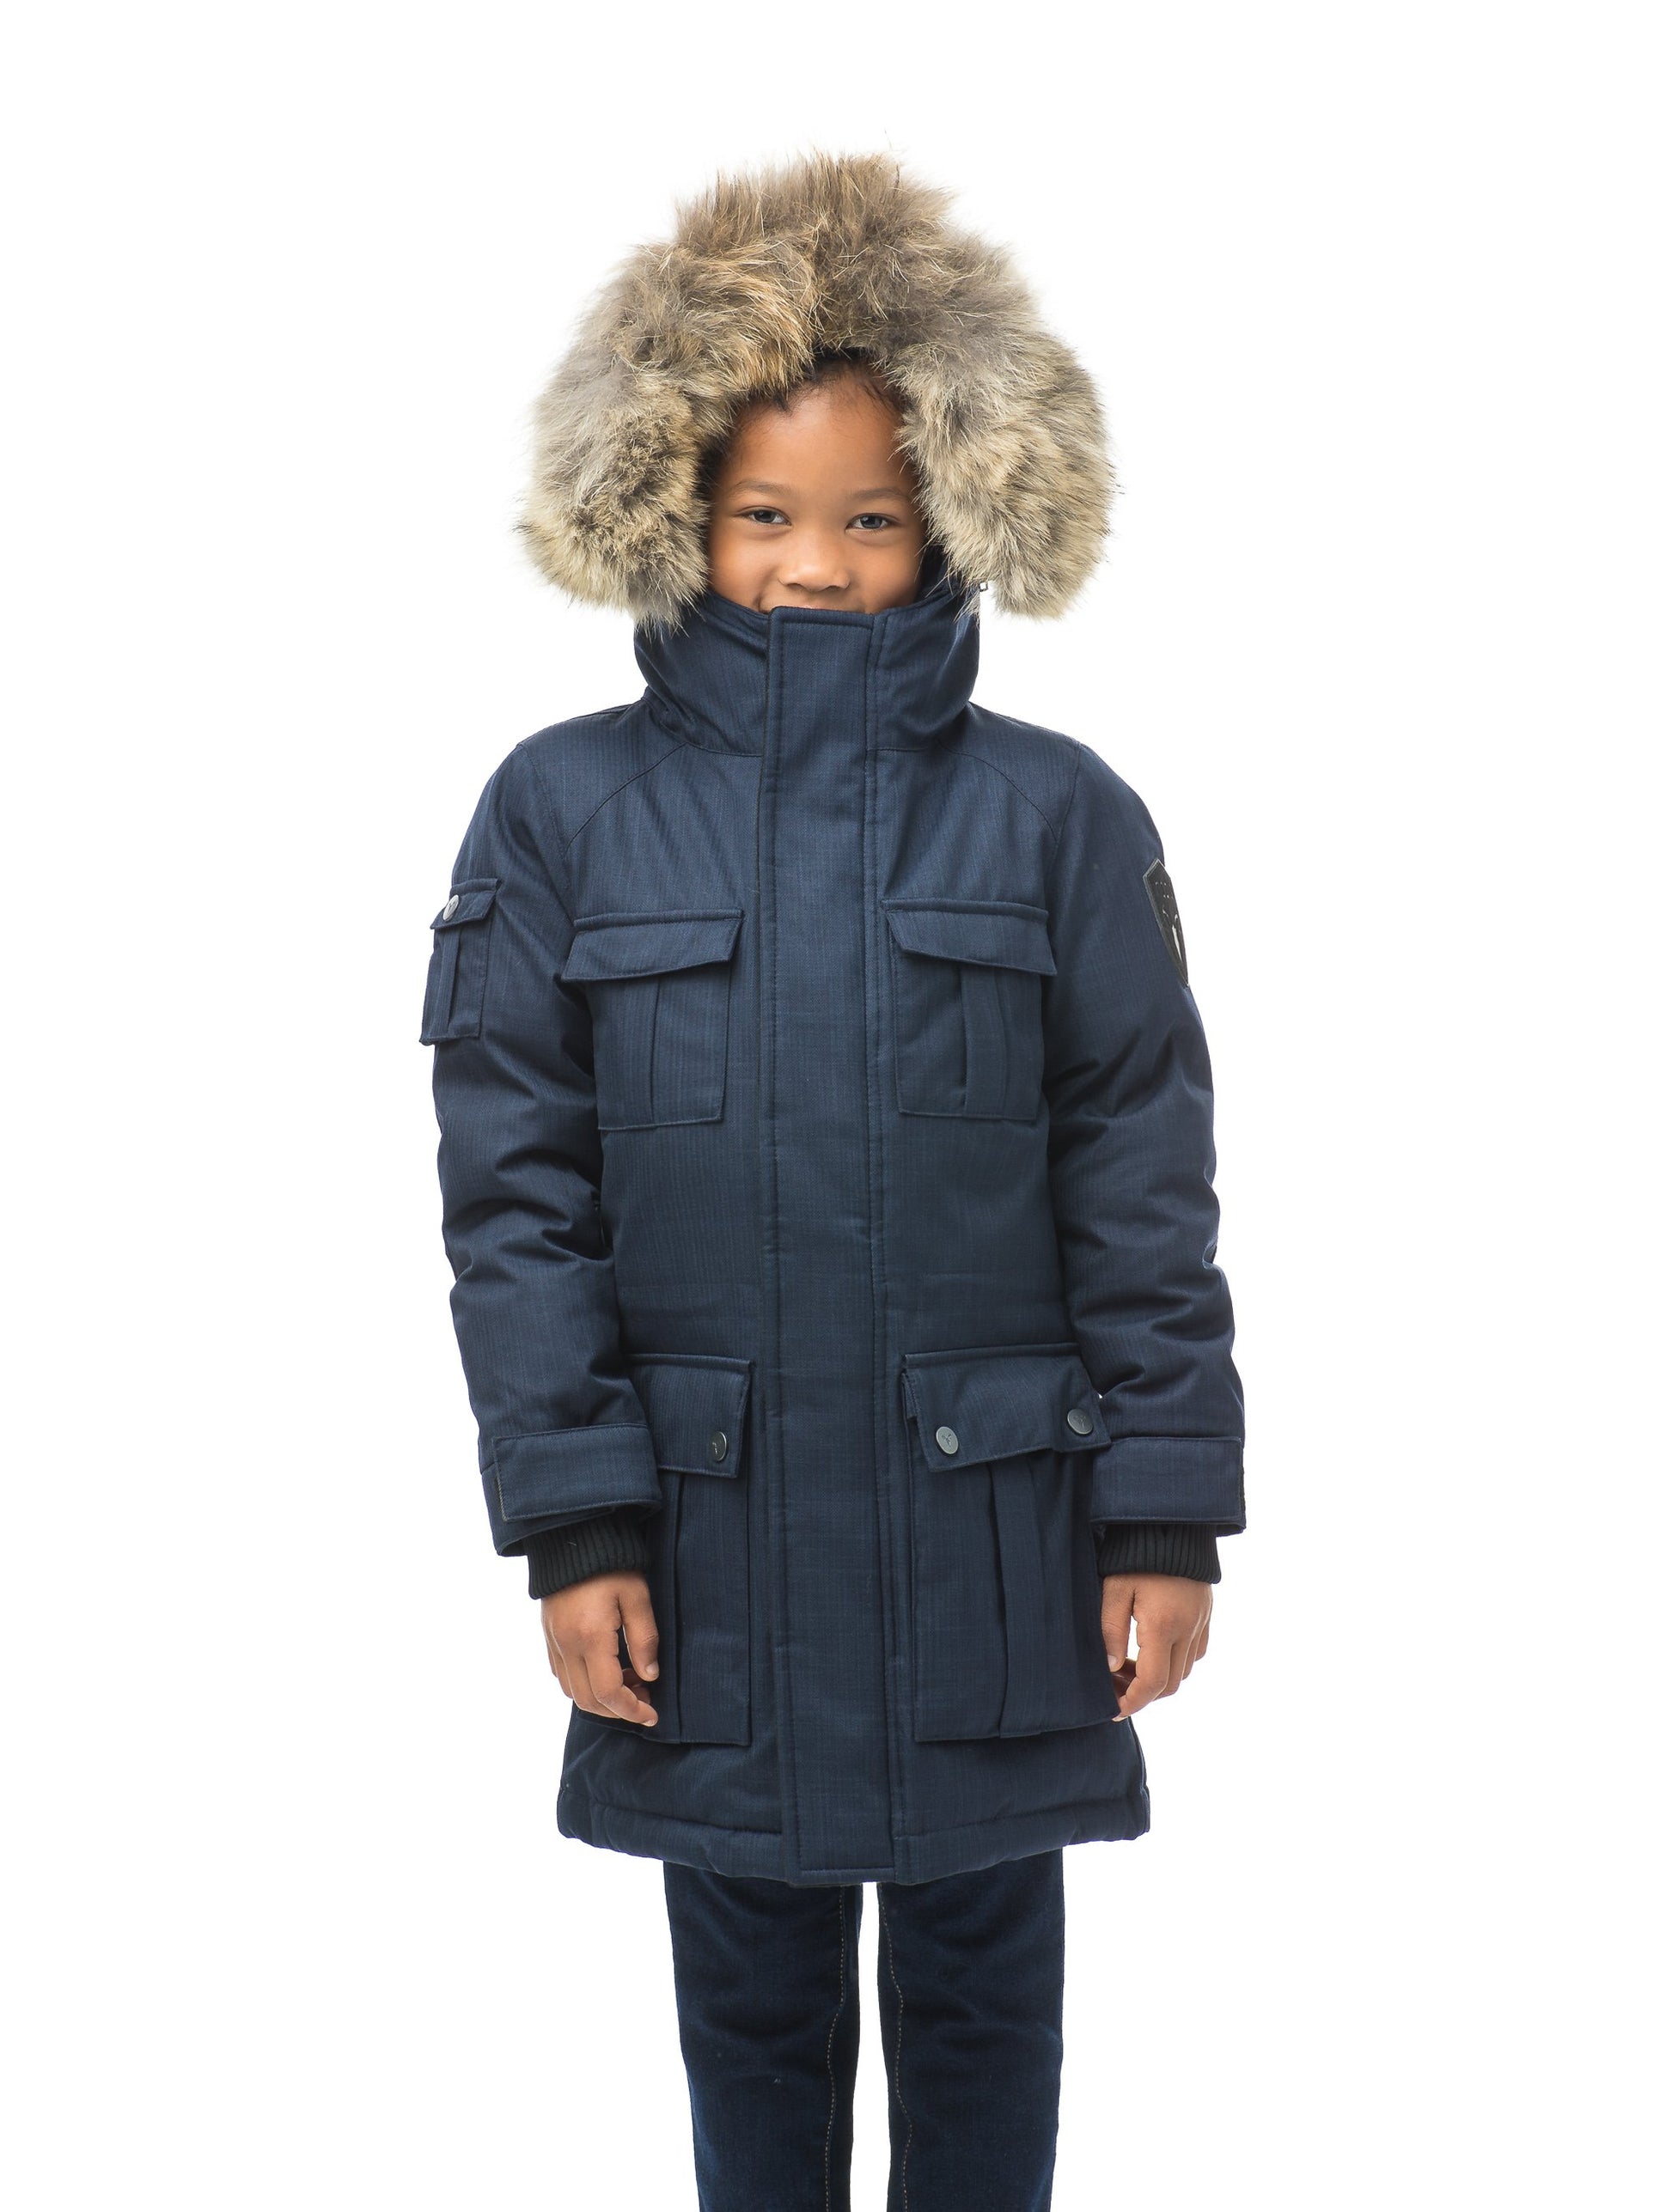 Kid's knee length parka with magnetized closure in CH Navy